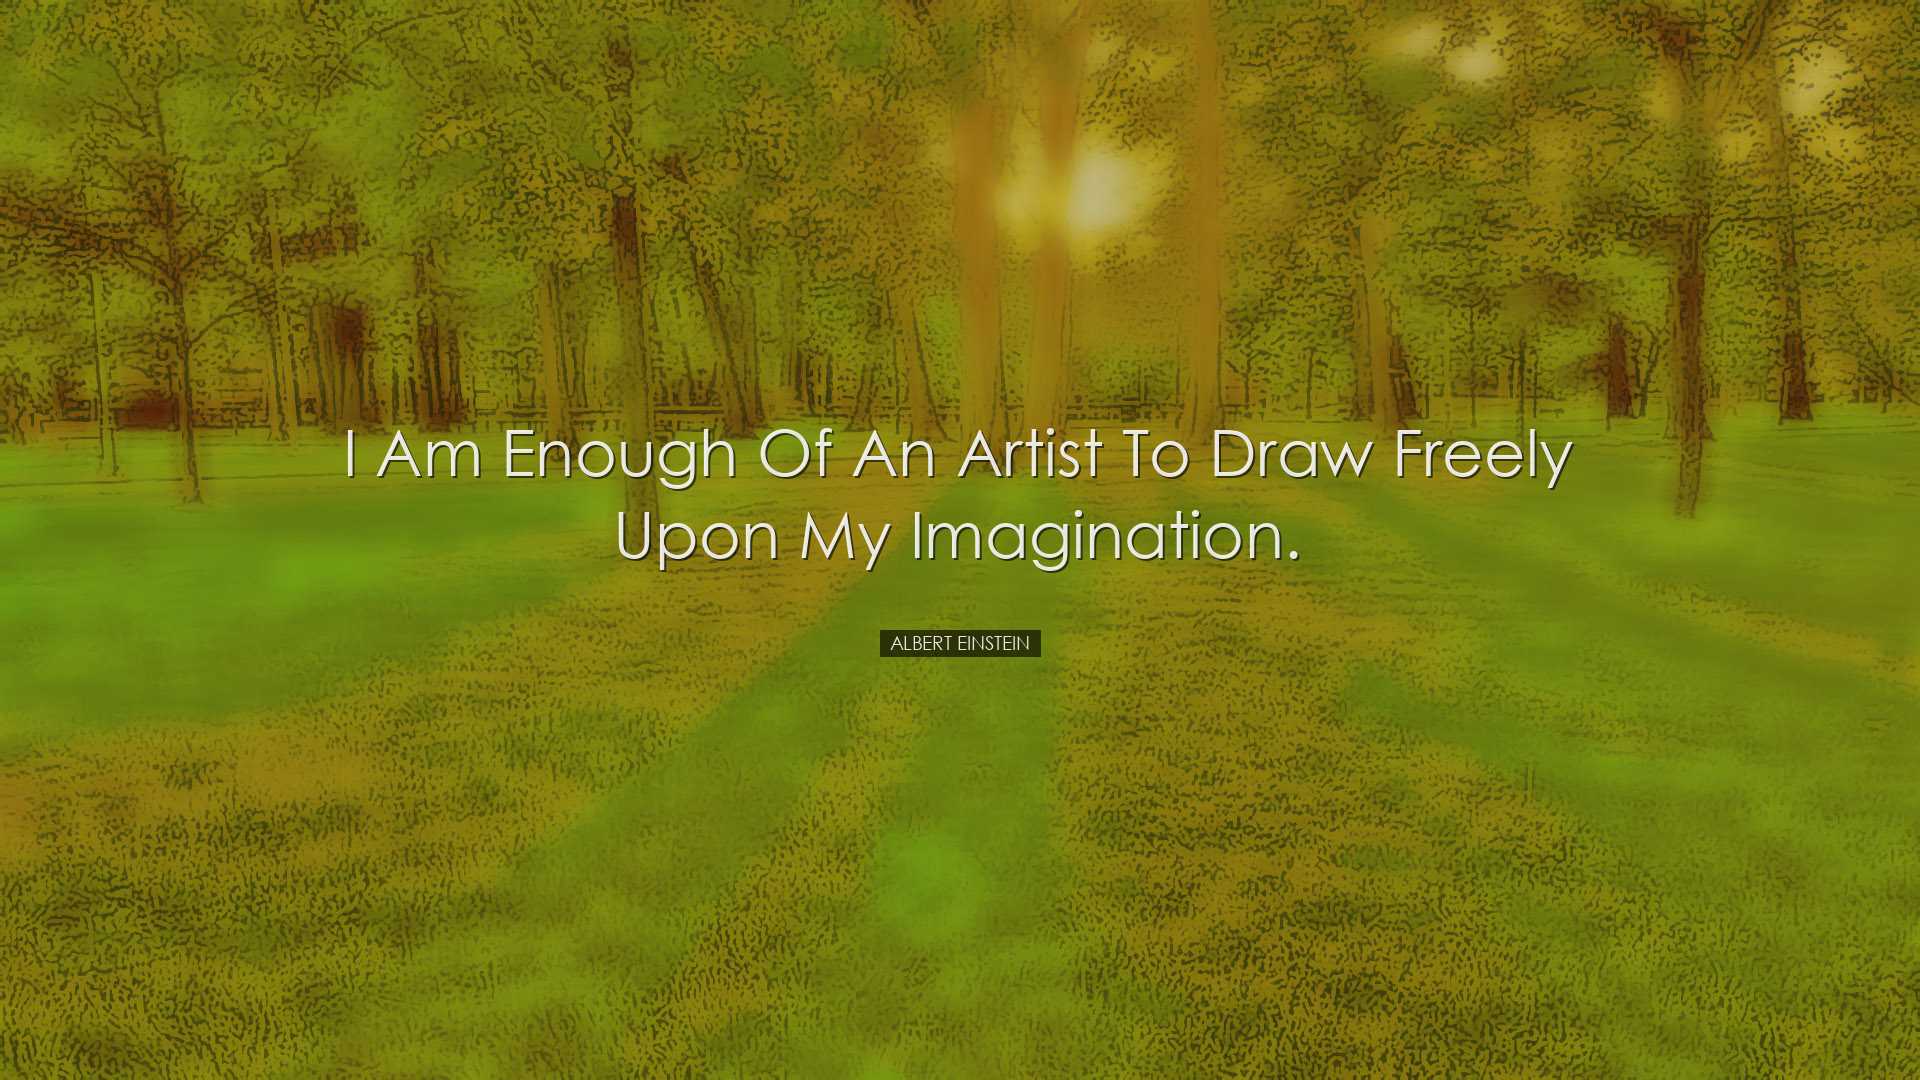 I am enough of an artist to draw freely upon my imagination. - Alb